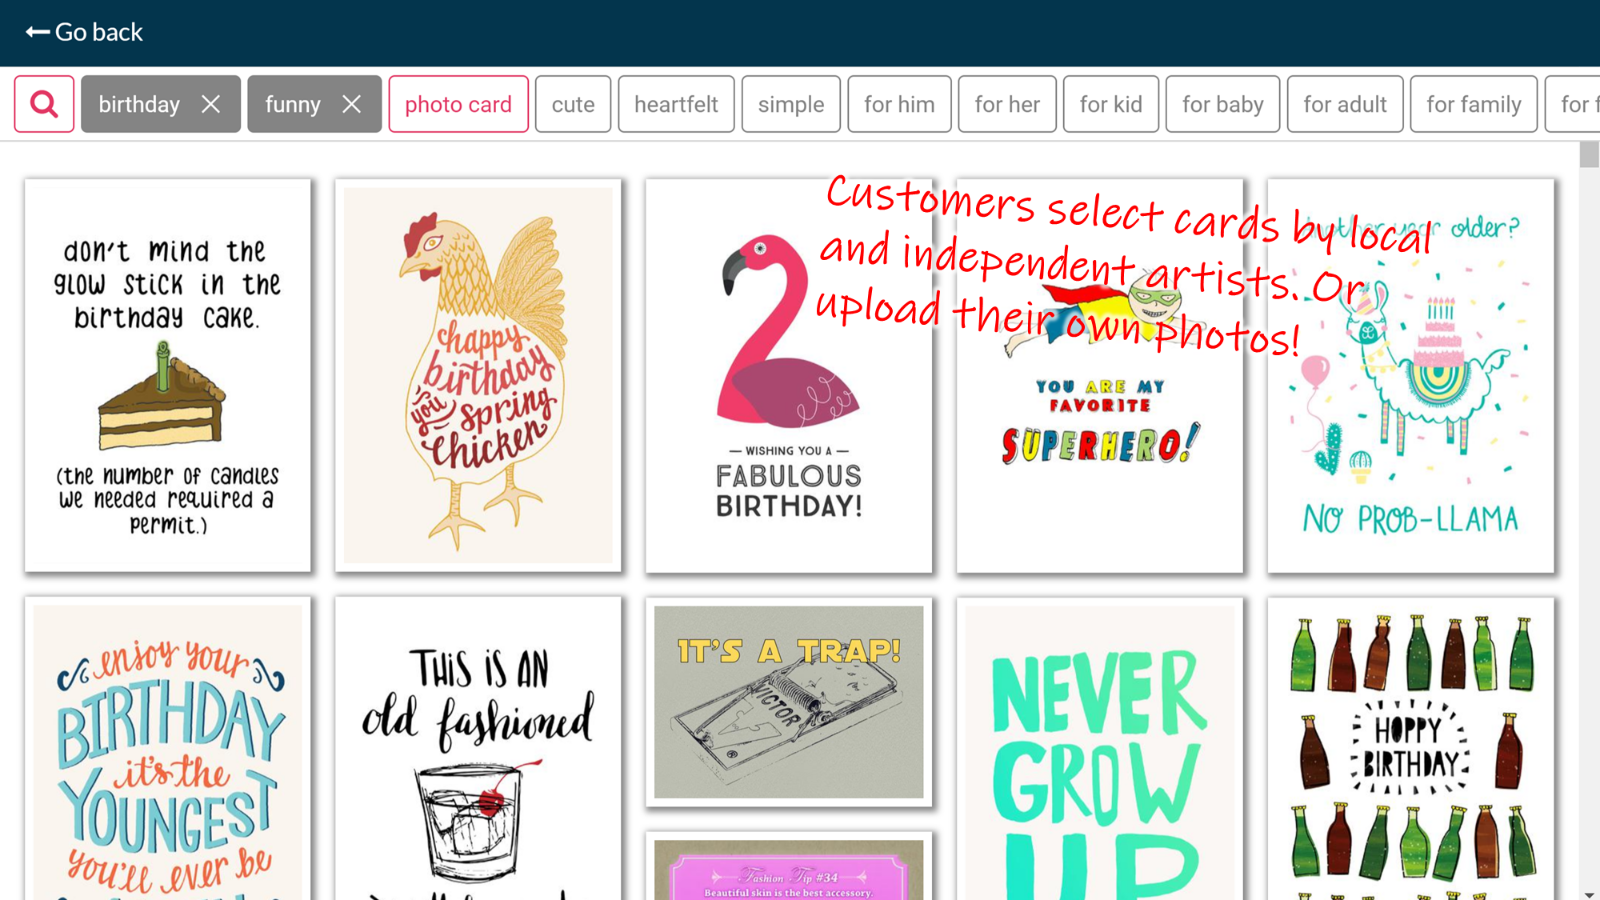 Customers select curated cards or upload their own